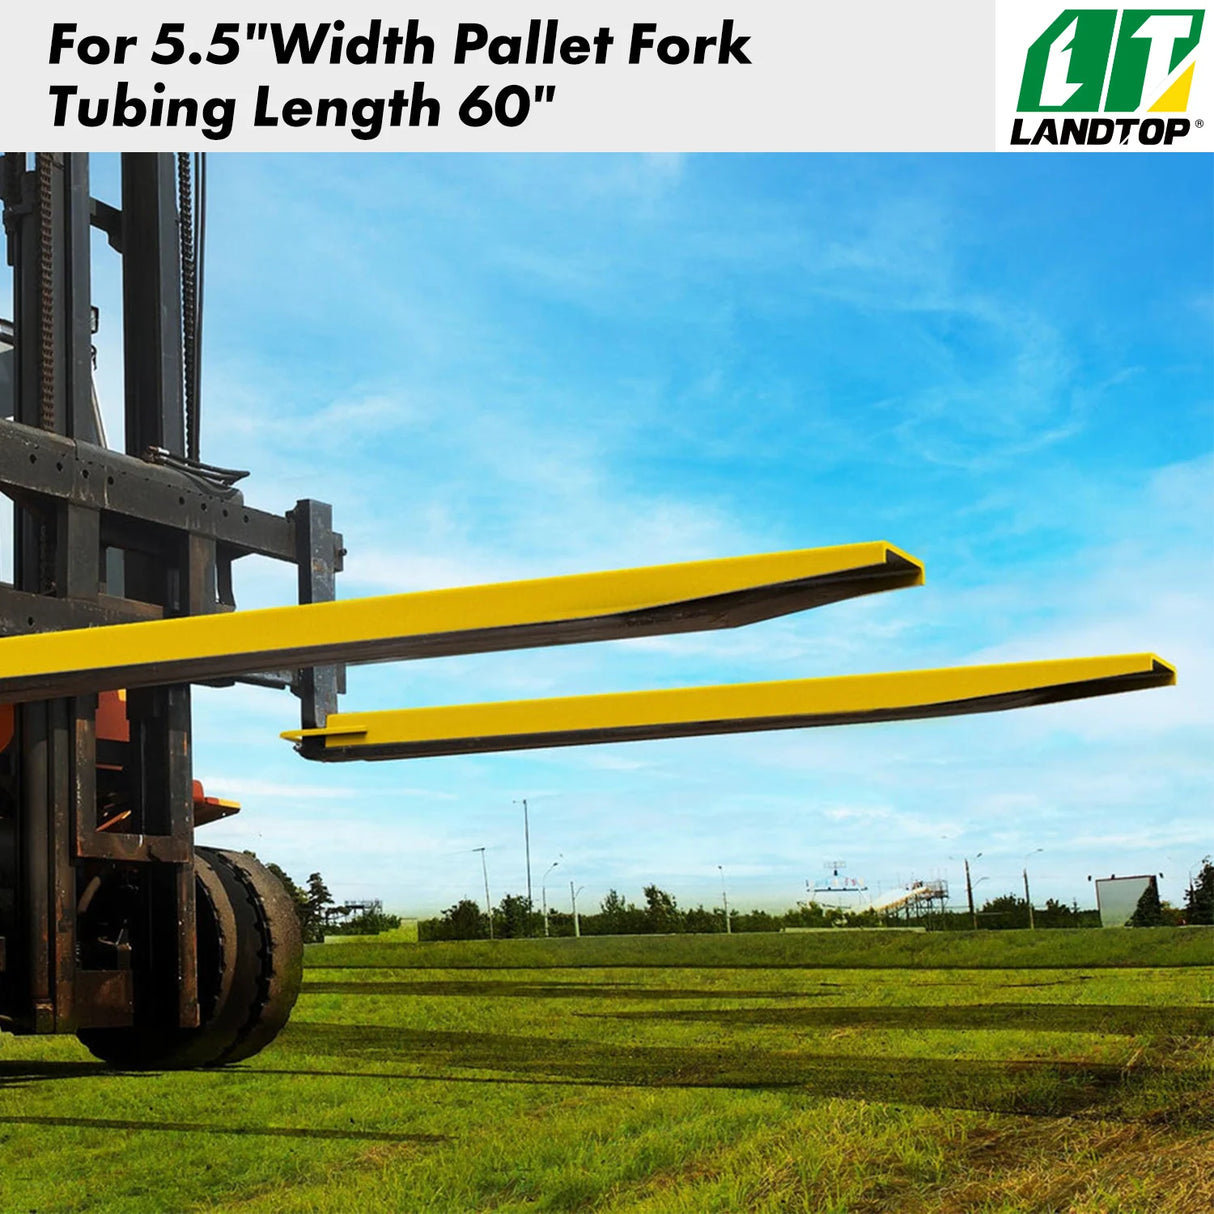 Fork Extensions 60 inch Length, 5.5 inch Width Pallet Fork Extensions for Forklift, Heavy Duty Steel 1 Pair Forklift Extensions,Yellow